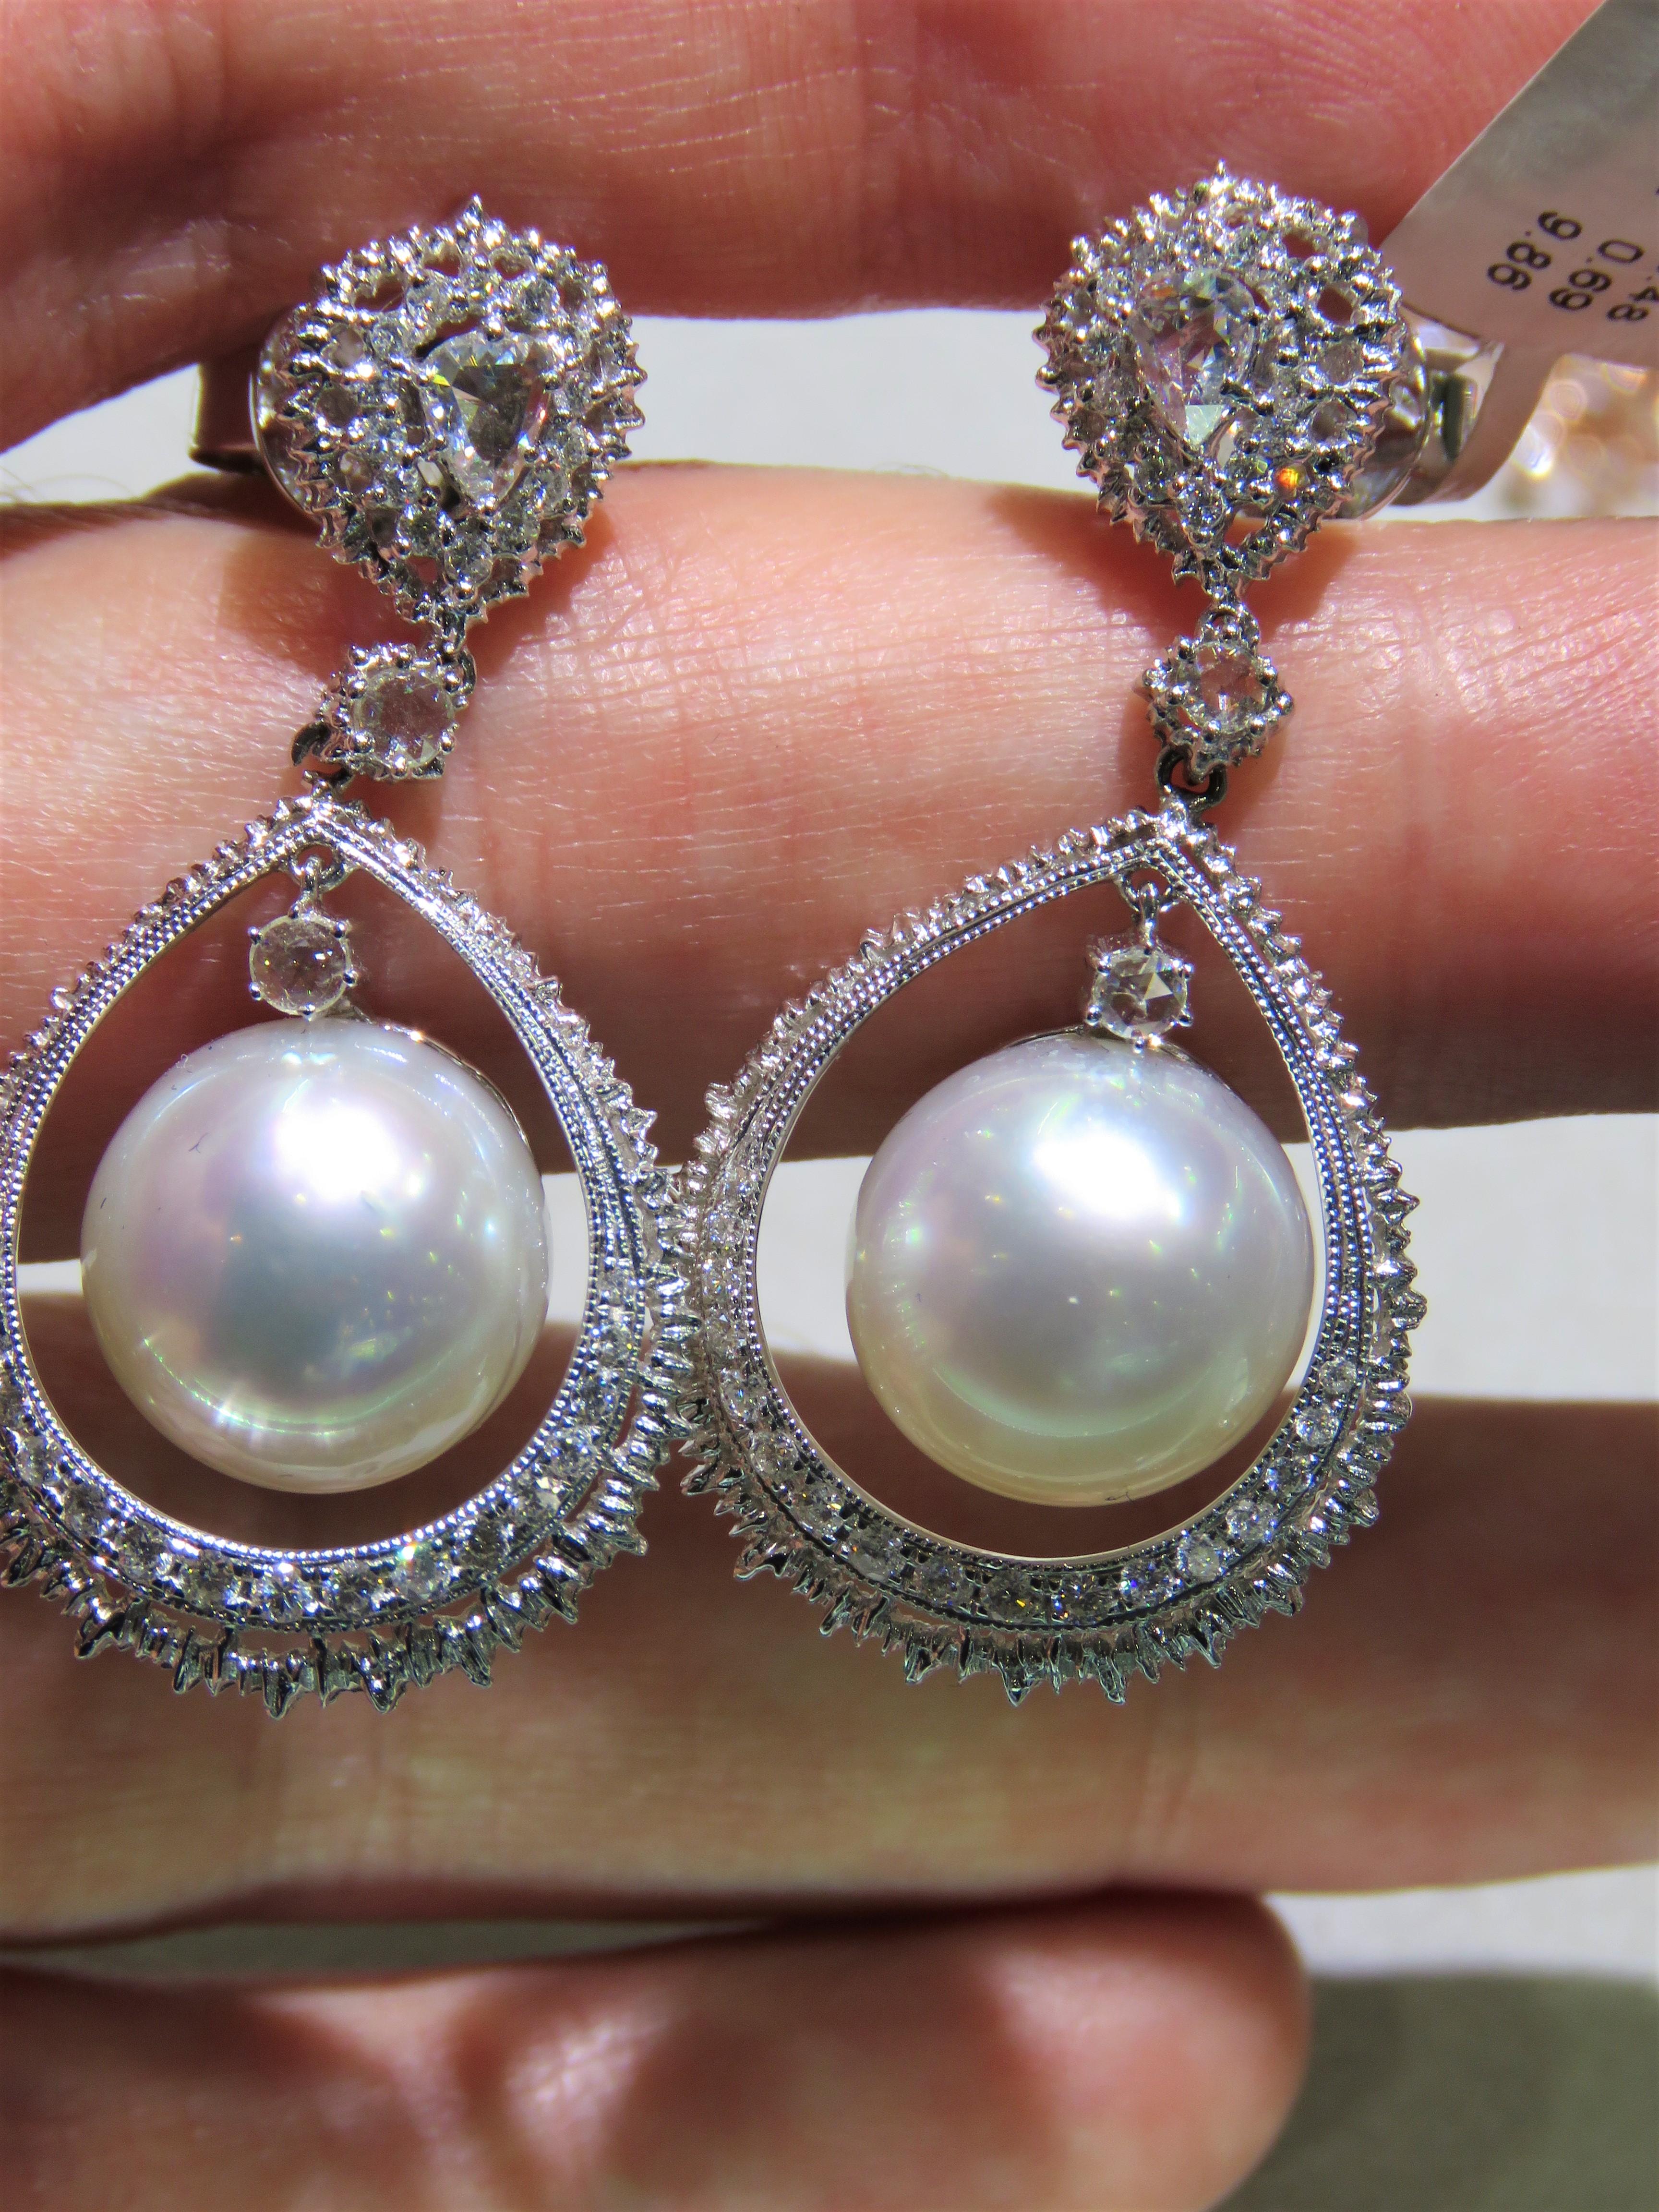 The Following Item we are offering are these Extremely Rare Beautiful 18KT Gold Fine Large Fancy South Sea White Pearl and Diamond Earrings. Each Earring features Gorgeous Glittering Diamonds adorned by a Magnificent Fine Fancy Large South Sea